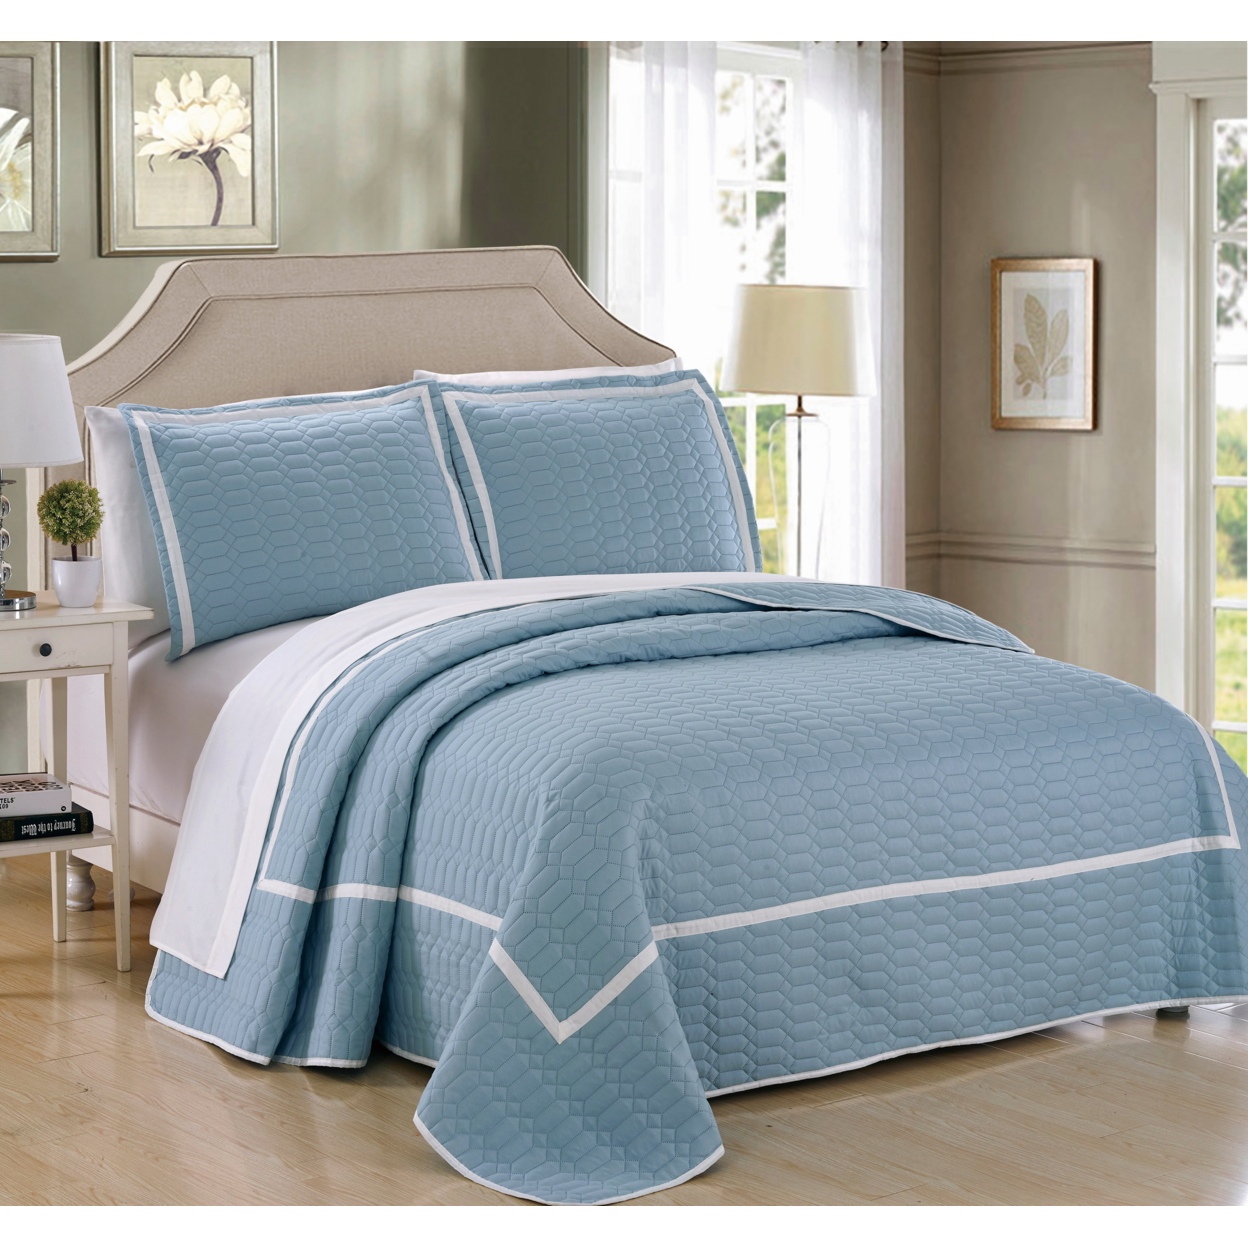 Chic Home 7 Piece Halrowe Hotel Collection 2 Tone Banded Quilted Geometrical Embroidered, Quilt In A Bag, Includes Sheets Set Quilt Set - Bl